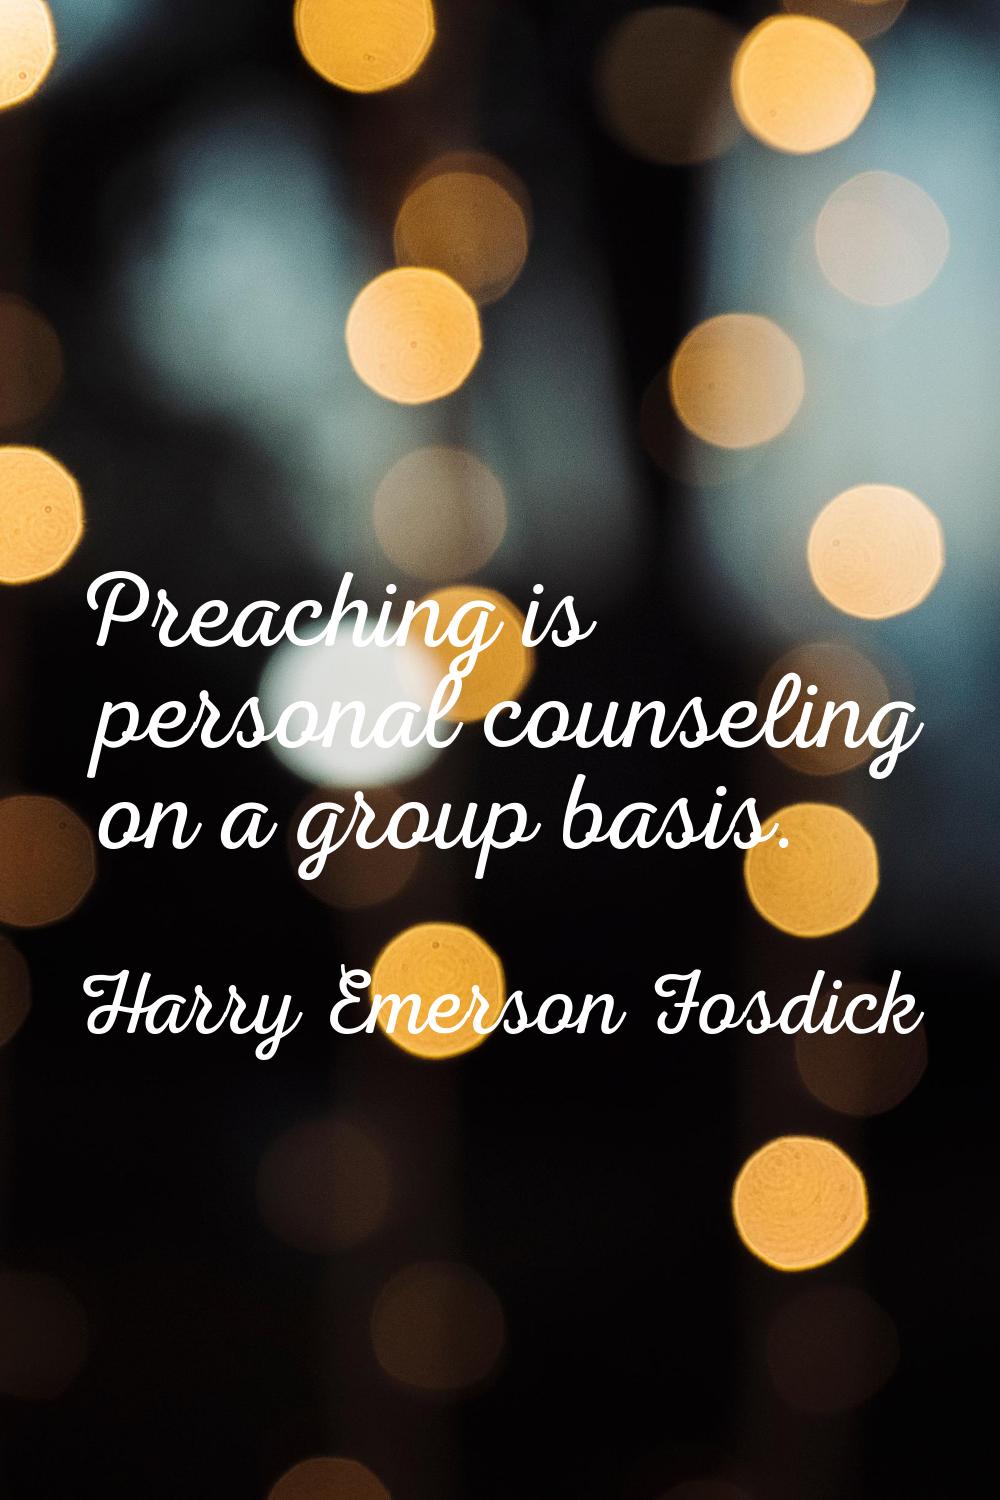 Preaching is personal counseling on a group basis.